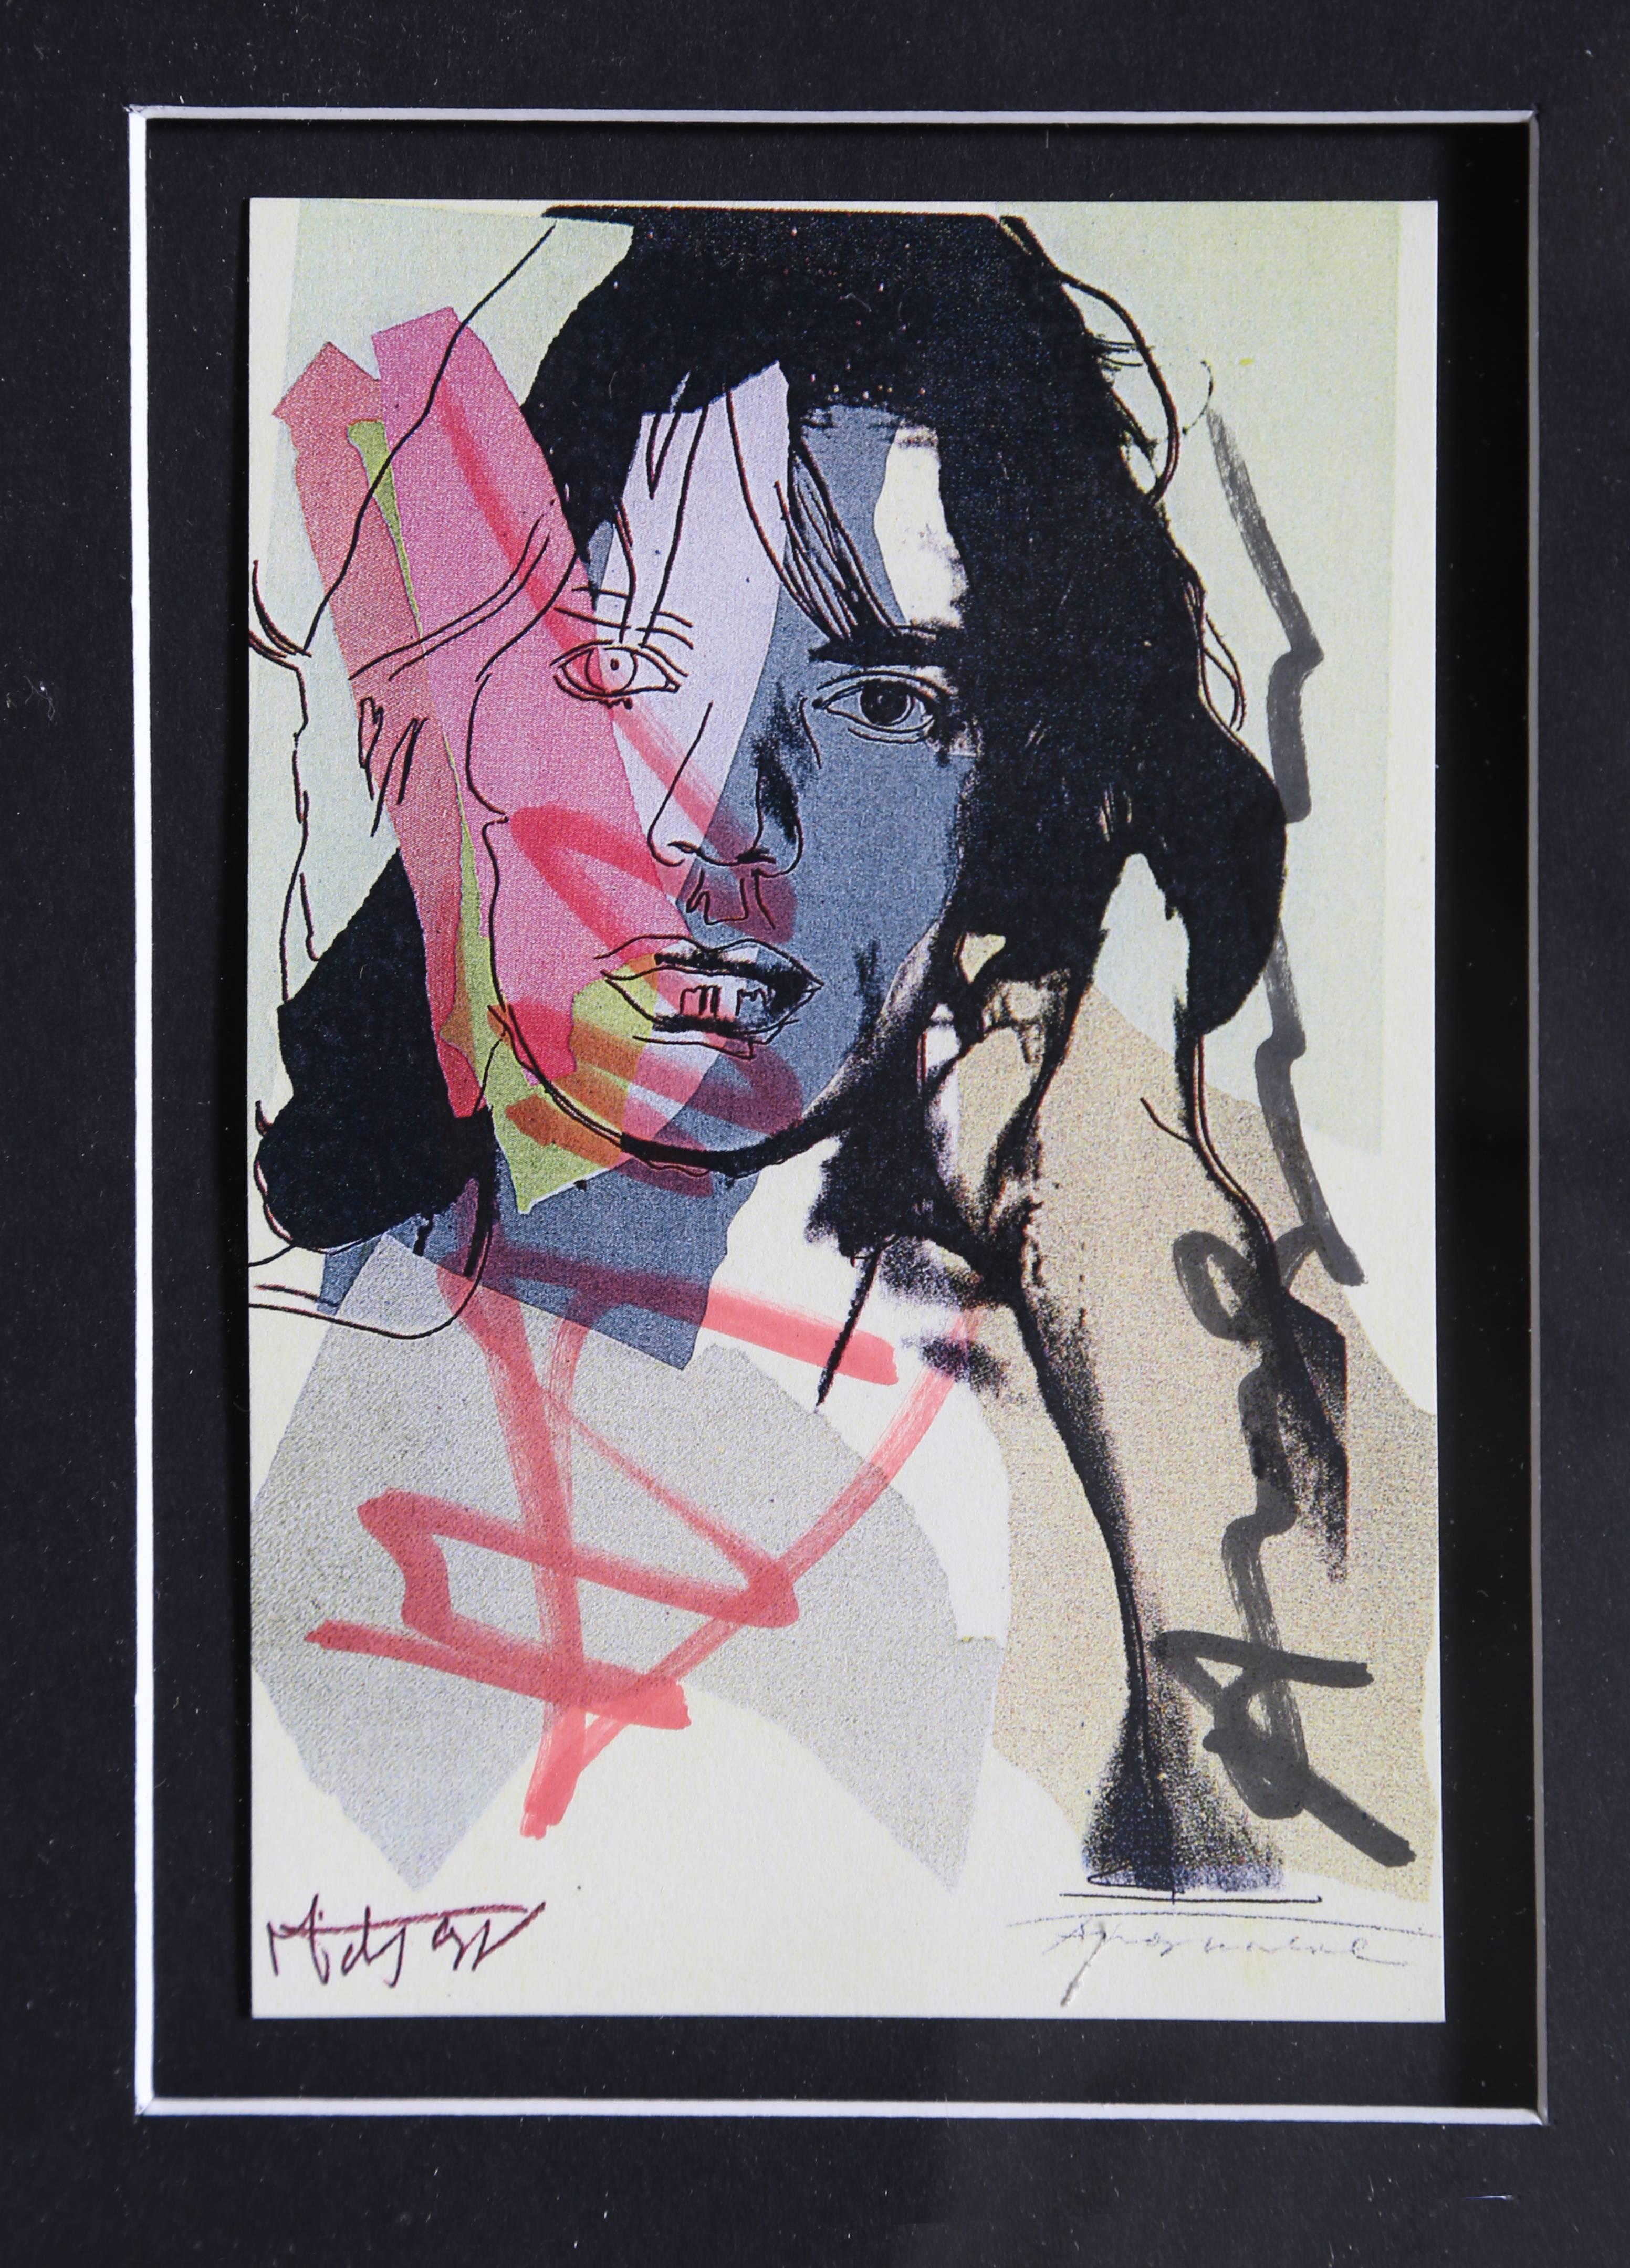 Mick Jagger Announcement Card Portfolio - Pop Art Print by (after) Andy Warhol